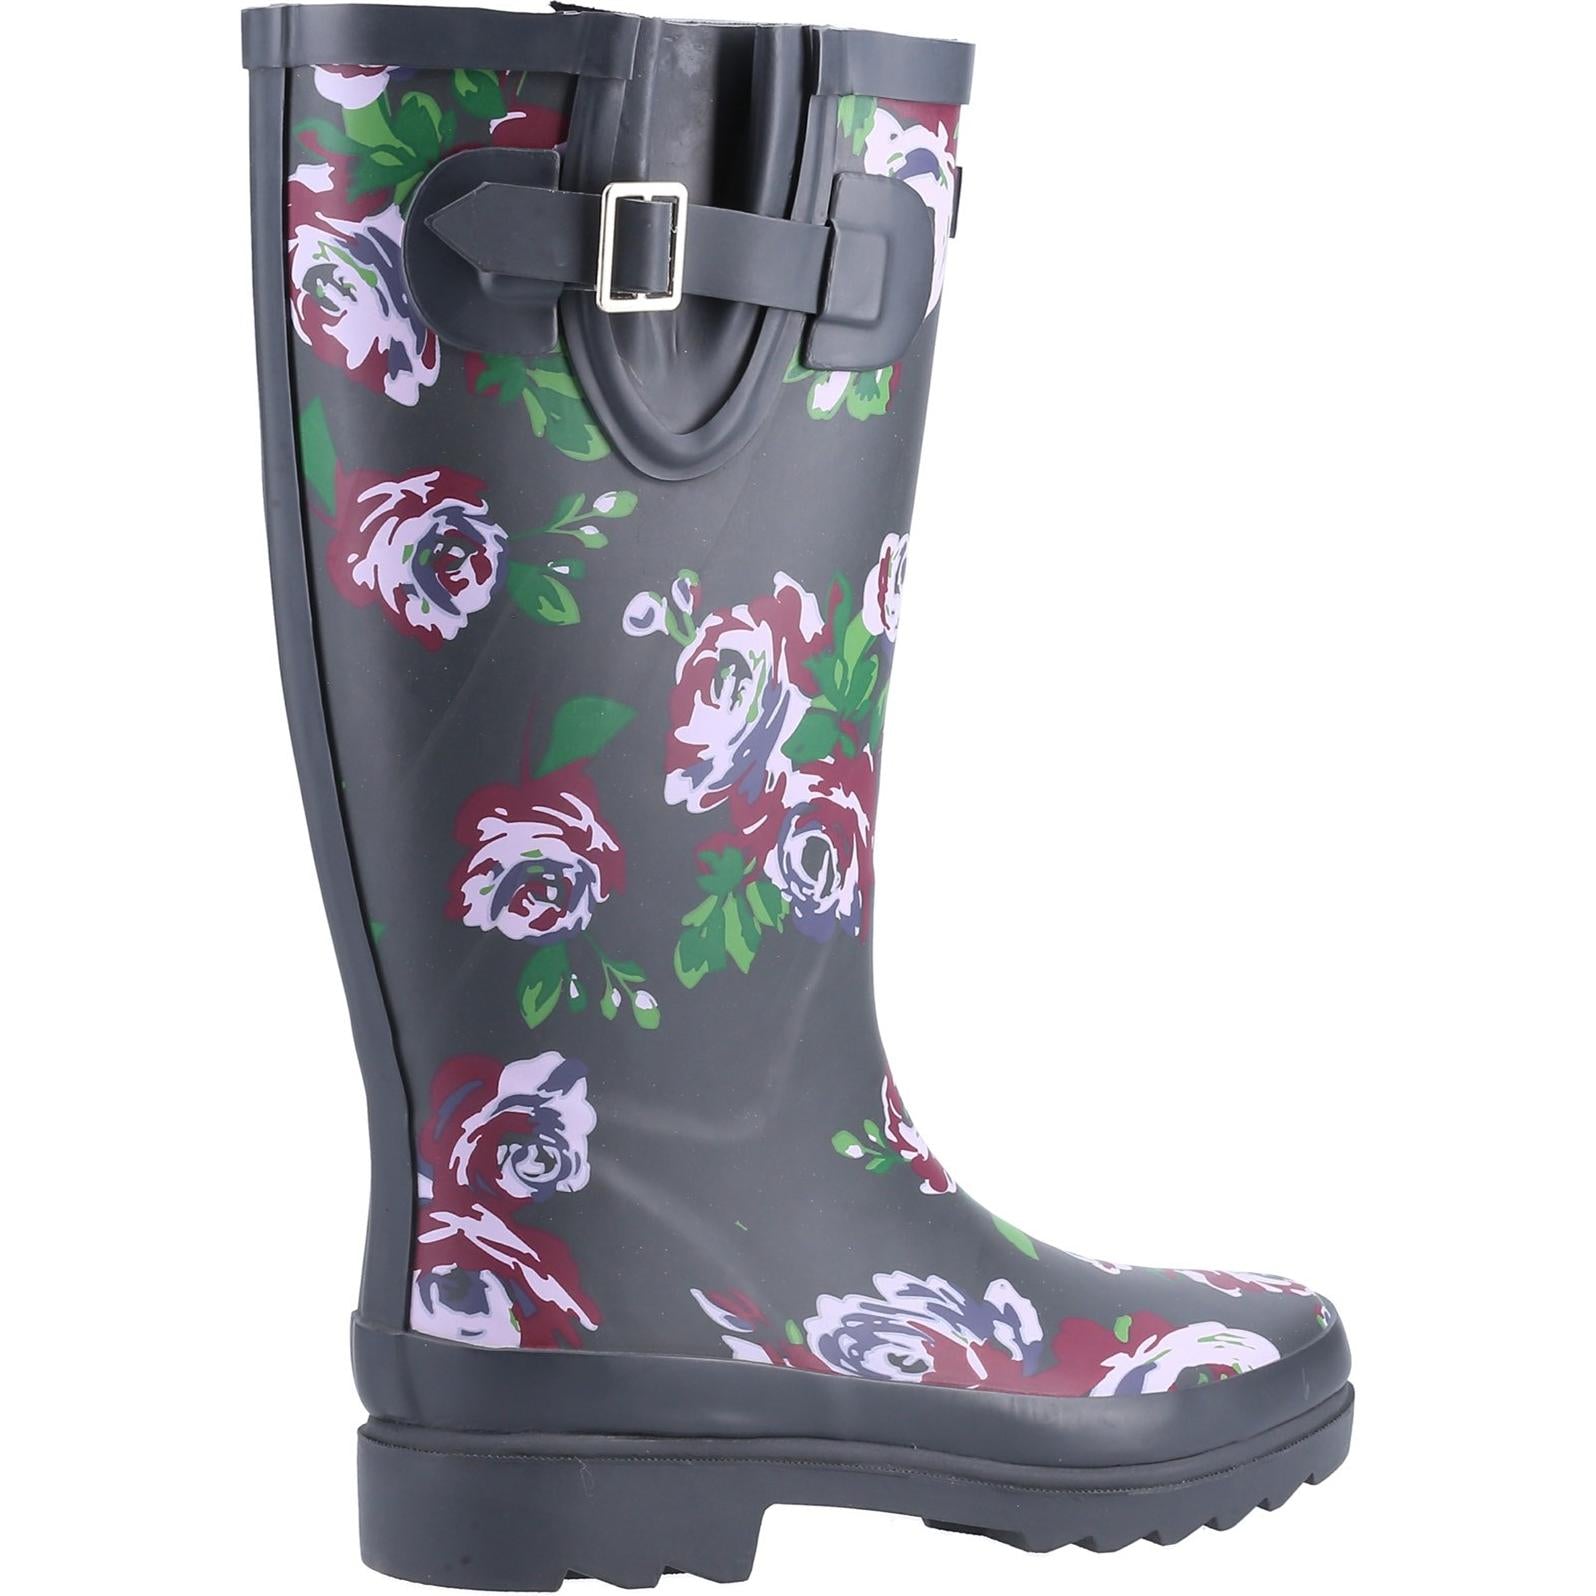 Cotswold Blossom Welly Boots